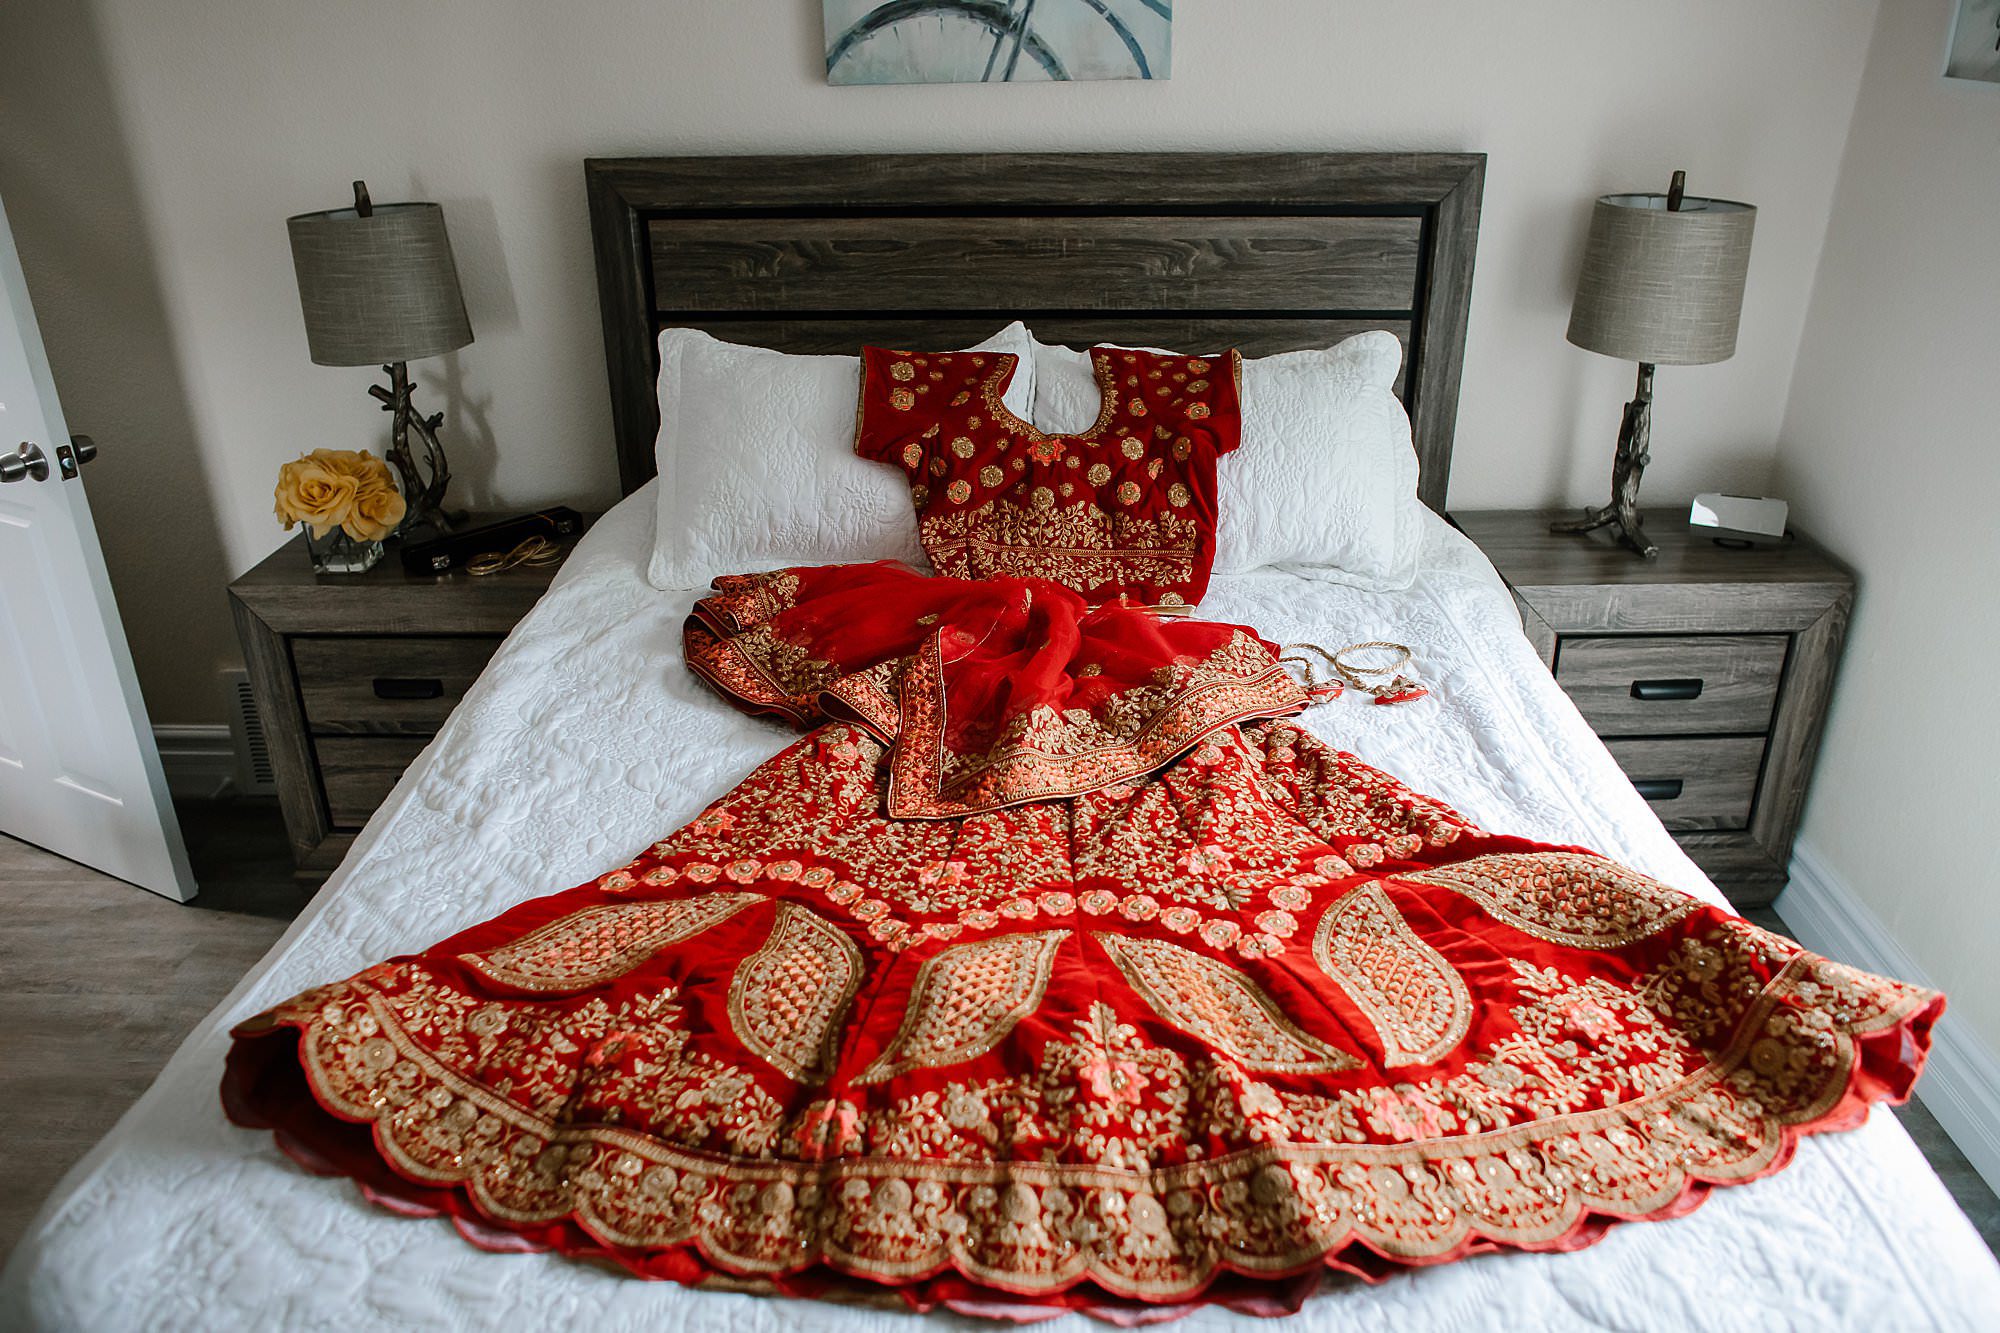 Red and gold Hindu saree on a bed